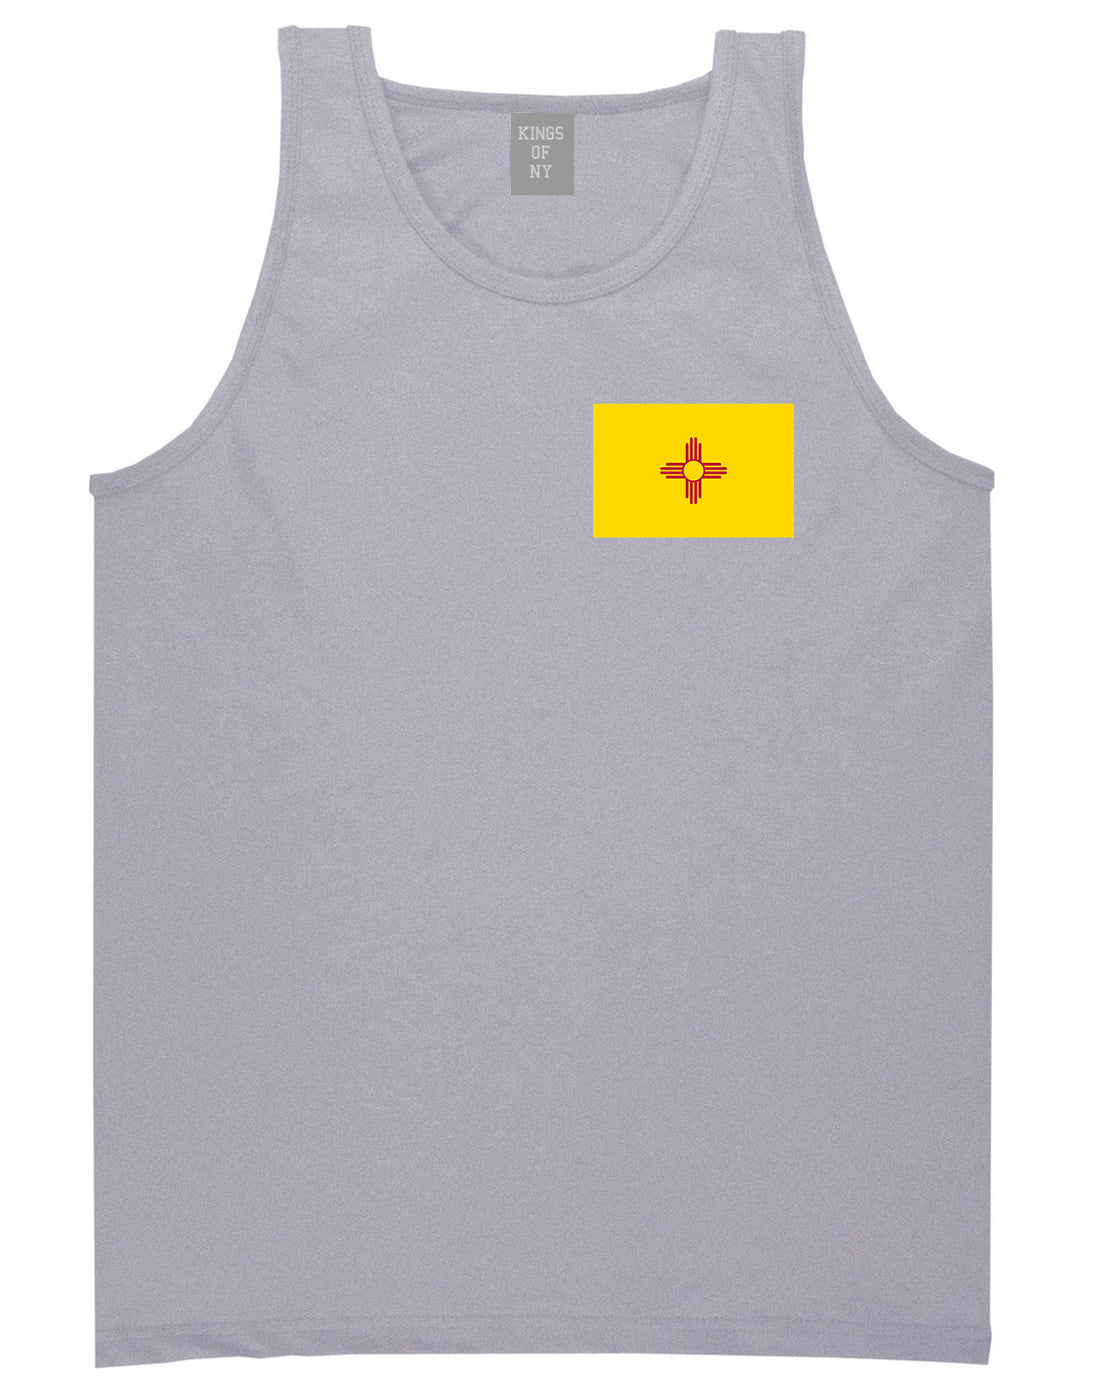 New Mexico State Flag NM Chest Mens Tank Top T-Shirt Grey